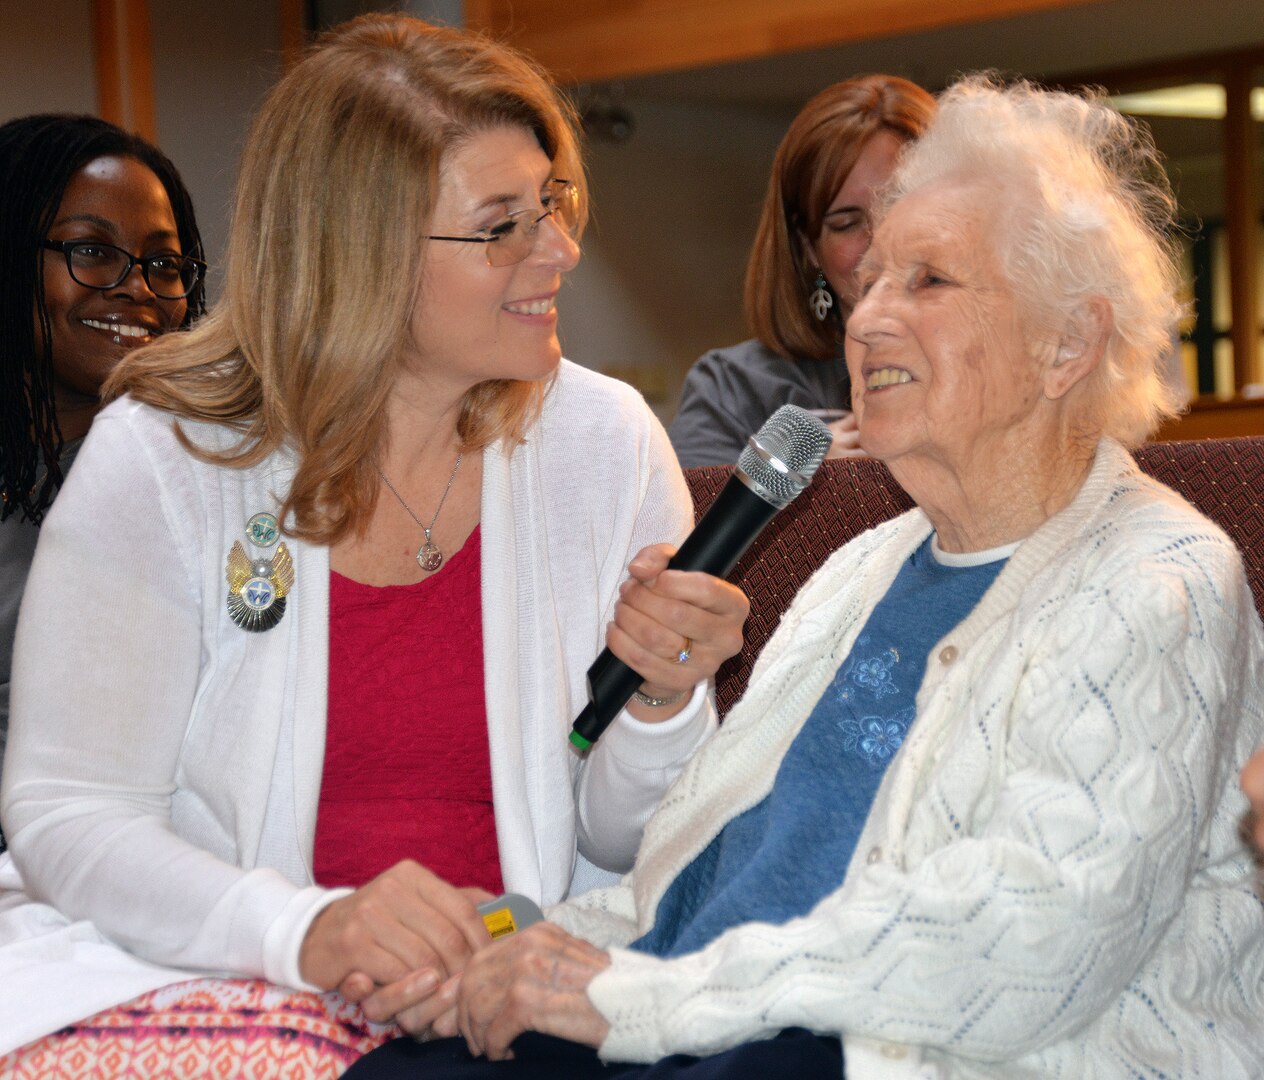 Betty Beard (right) speaks about her time in the Women's Army Corp during her 100th birthday celebration at the Dodd Field Chapel at Joint Base San Antonio-Fort Sam Houston April 11. Beard served during World War II and achieved the rank of technical sergeant, as well as meeting her husband while in the WAC. The Protestant Women of the Chapel threw the birthday bash for the new centenarian.